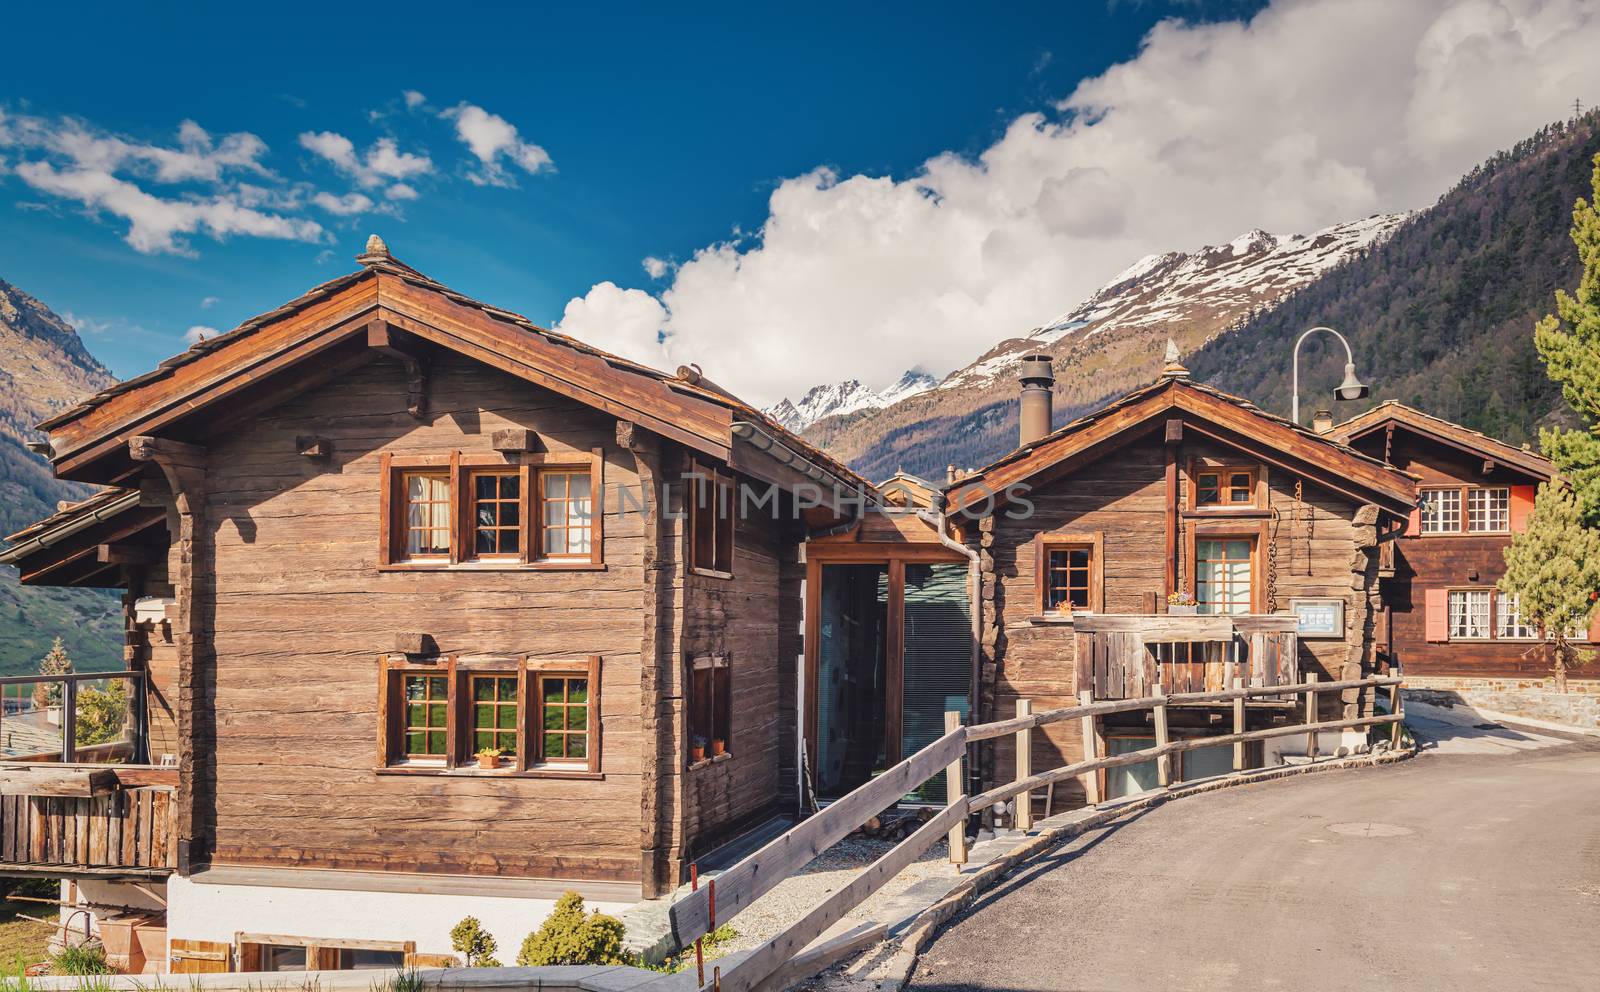 Landscape Scenery View Old Town Valley of Zermatt City, Switzerland. Cityscape Scenic of Traditional Architecture of Swiss Culture Against Mountain Alps. Travel Destination and Europe Vacation.